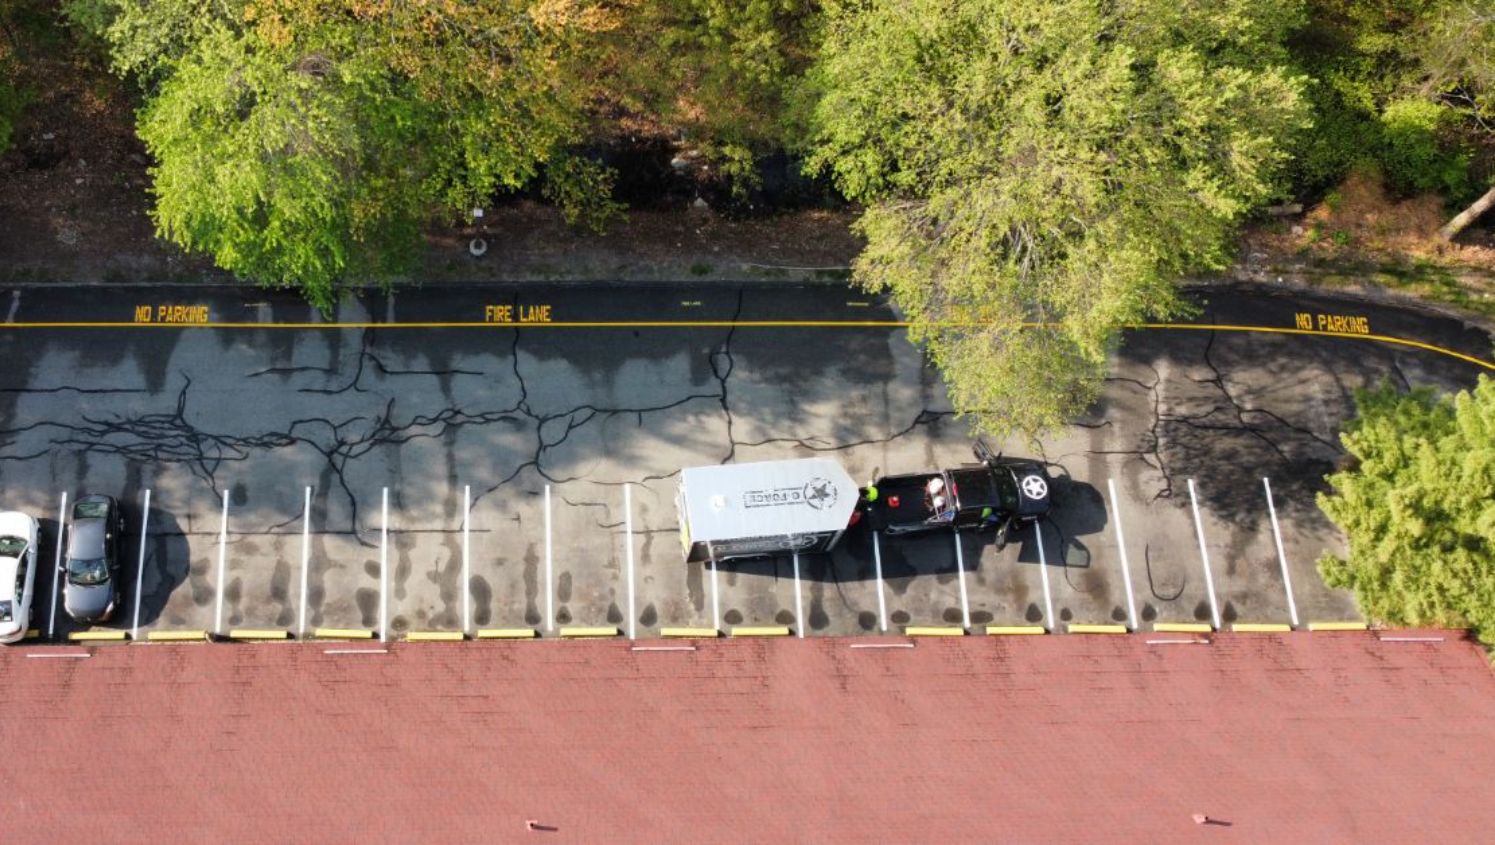 an aerial view of a G-FORCE truck